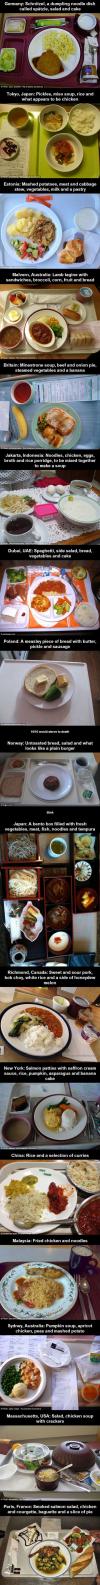 this is what hospital food looks like around the world